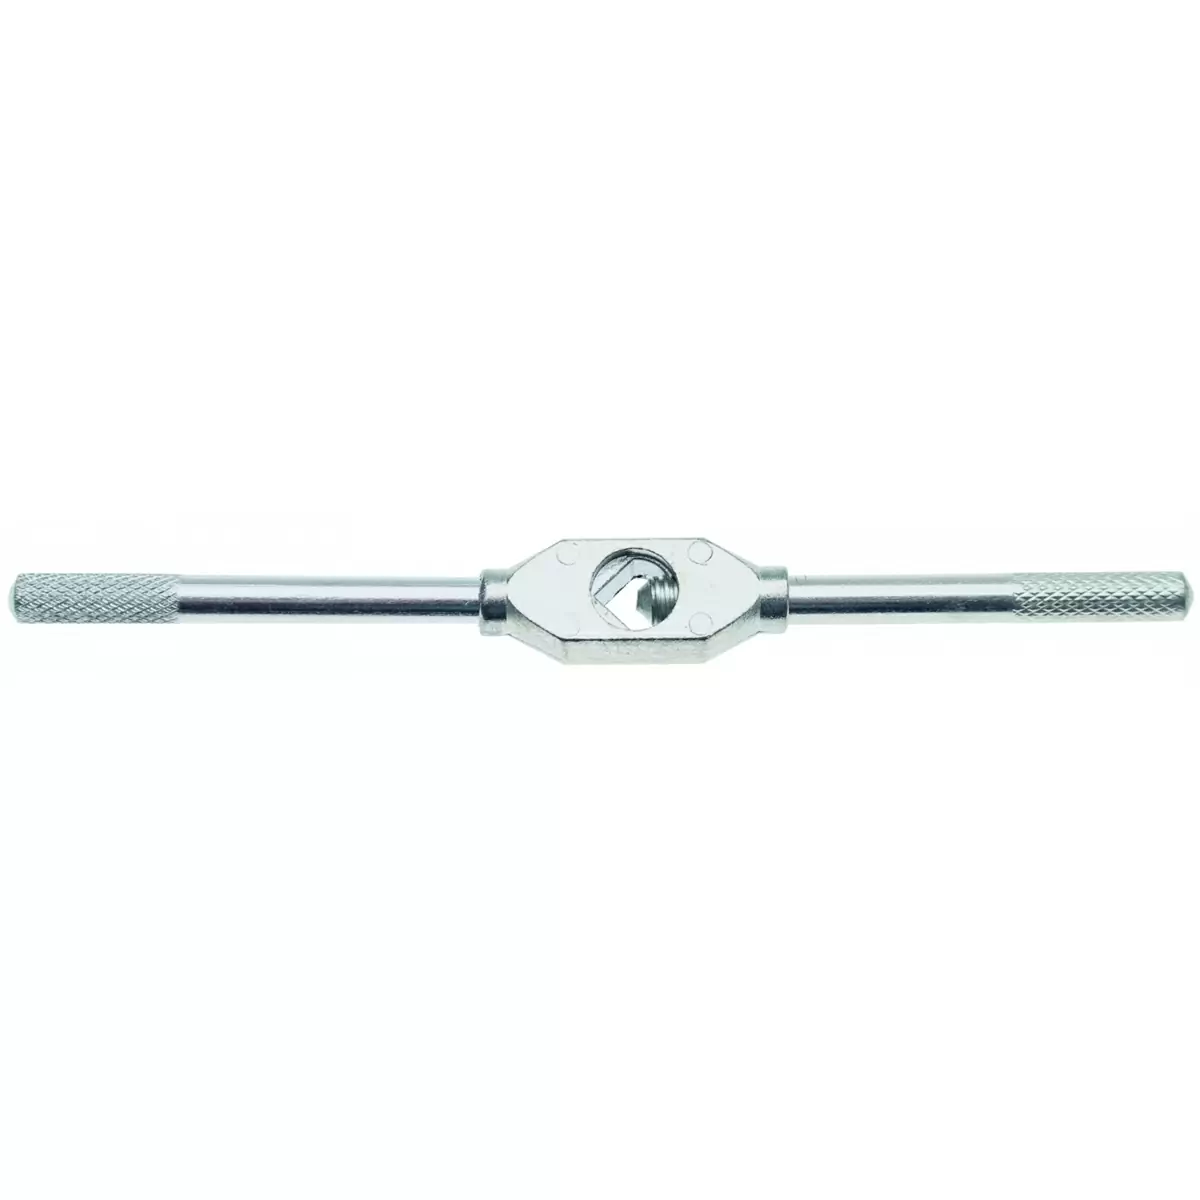 Tap Wrench M6 - M20 - Code BGS1900-2 - image